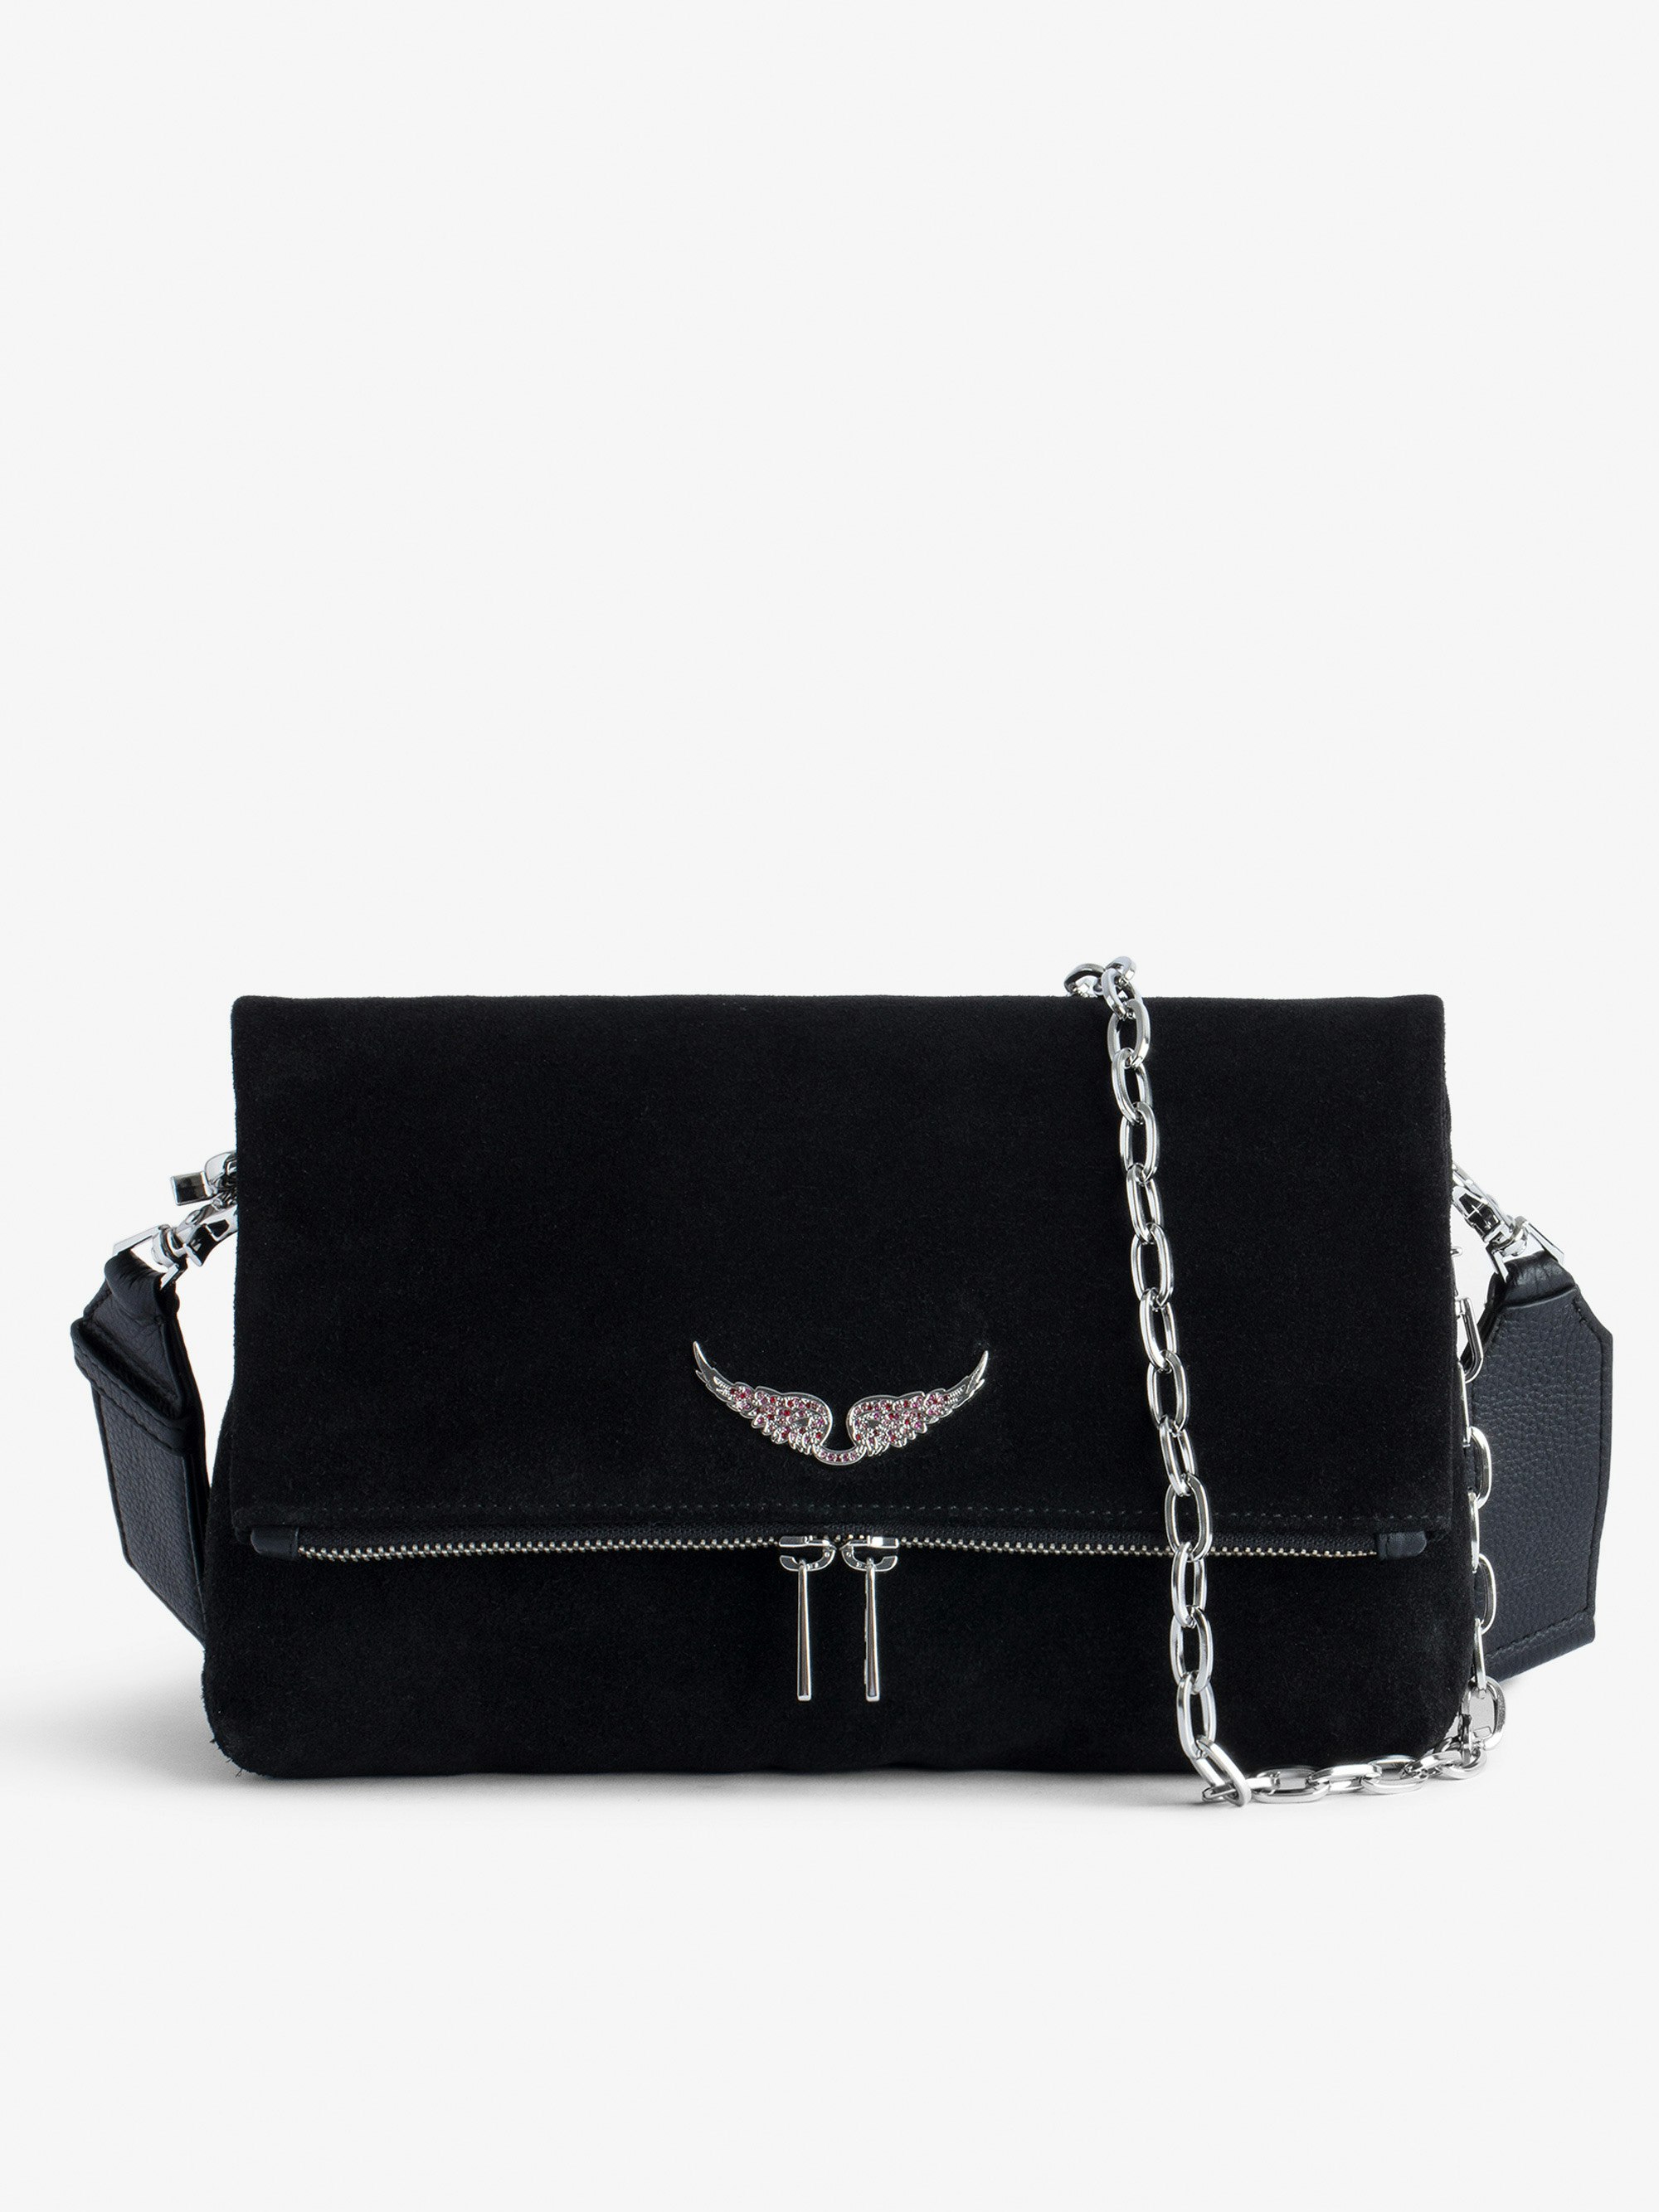 Rocky Suede Bag - Rocky black suede bag with leather shoulder strap and metal chain.